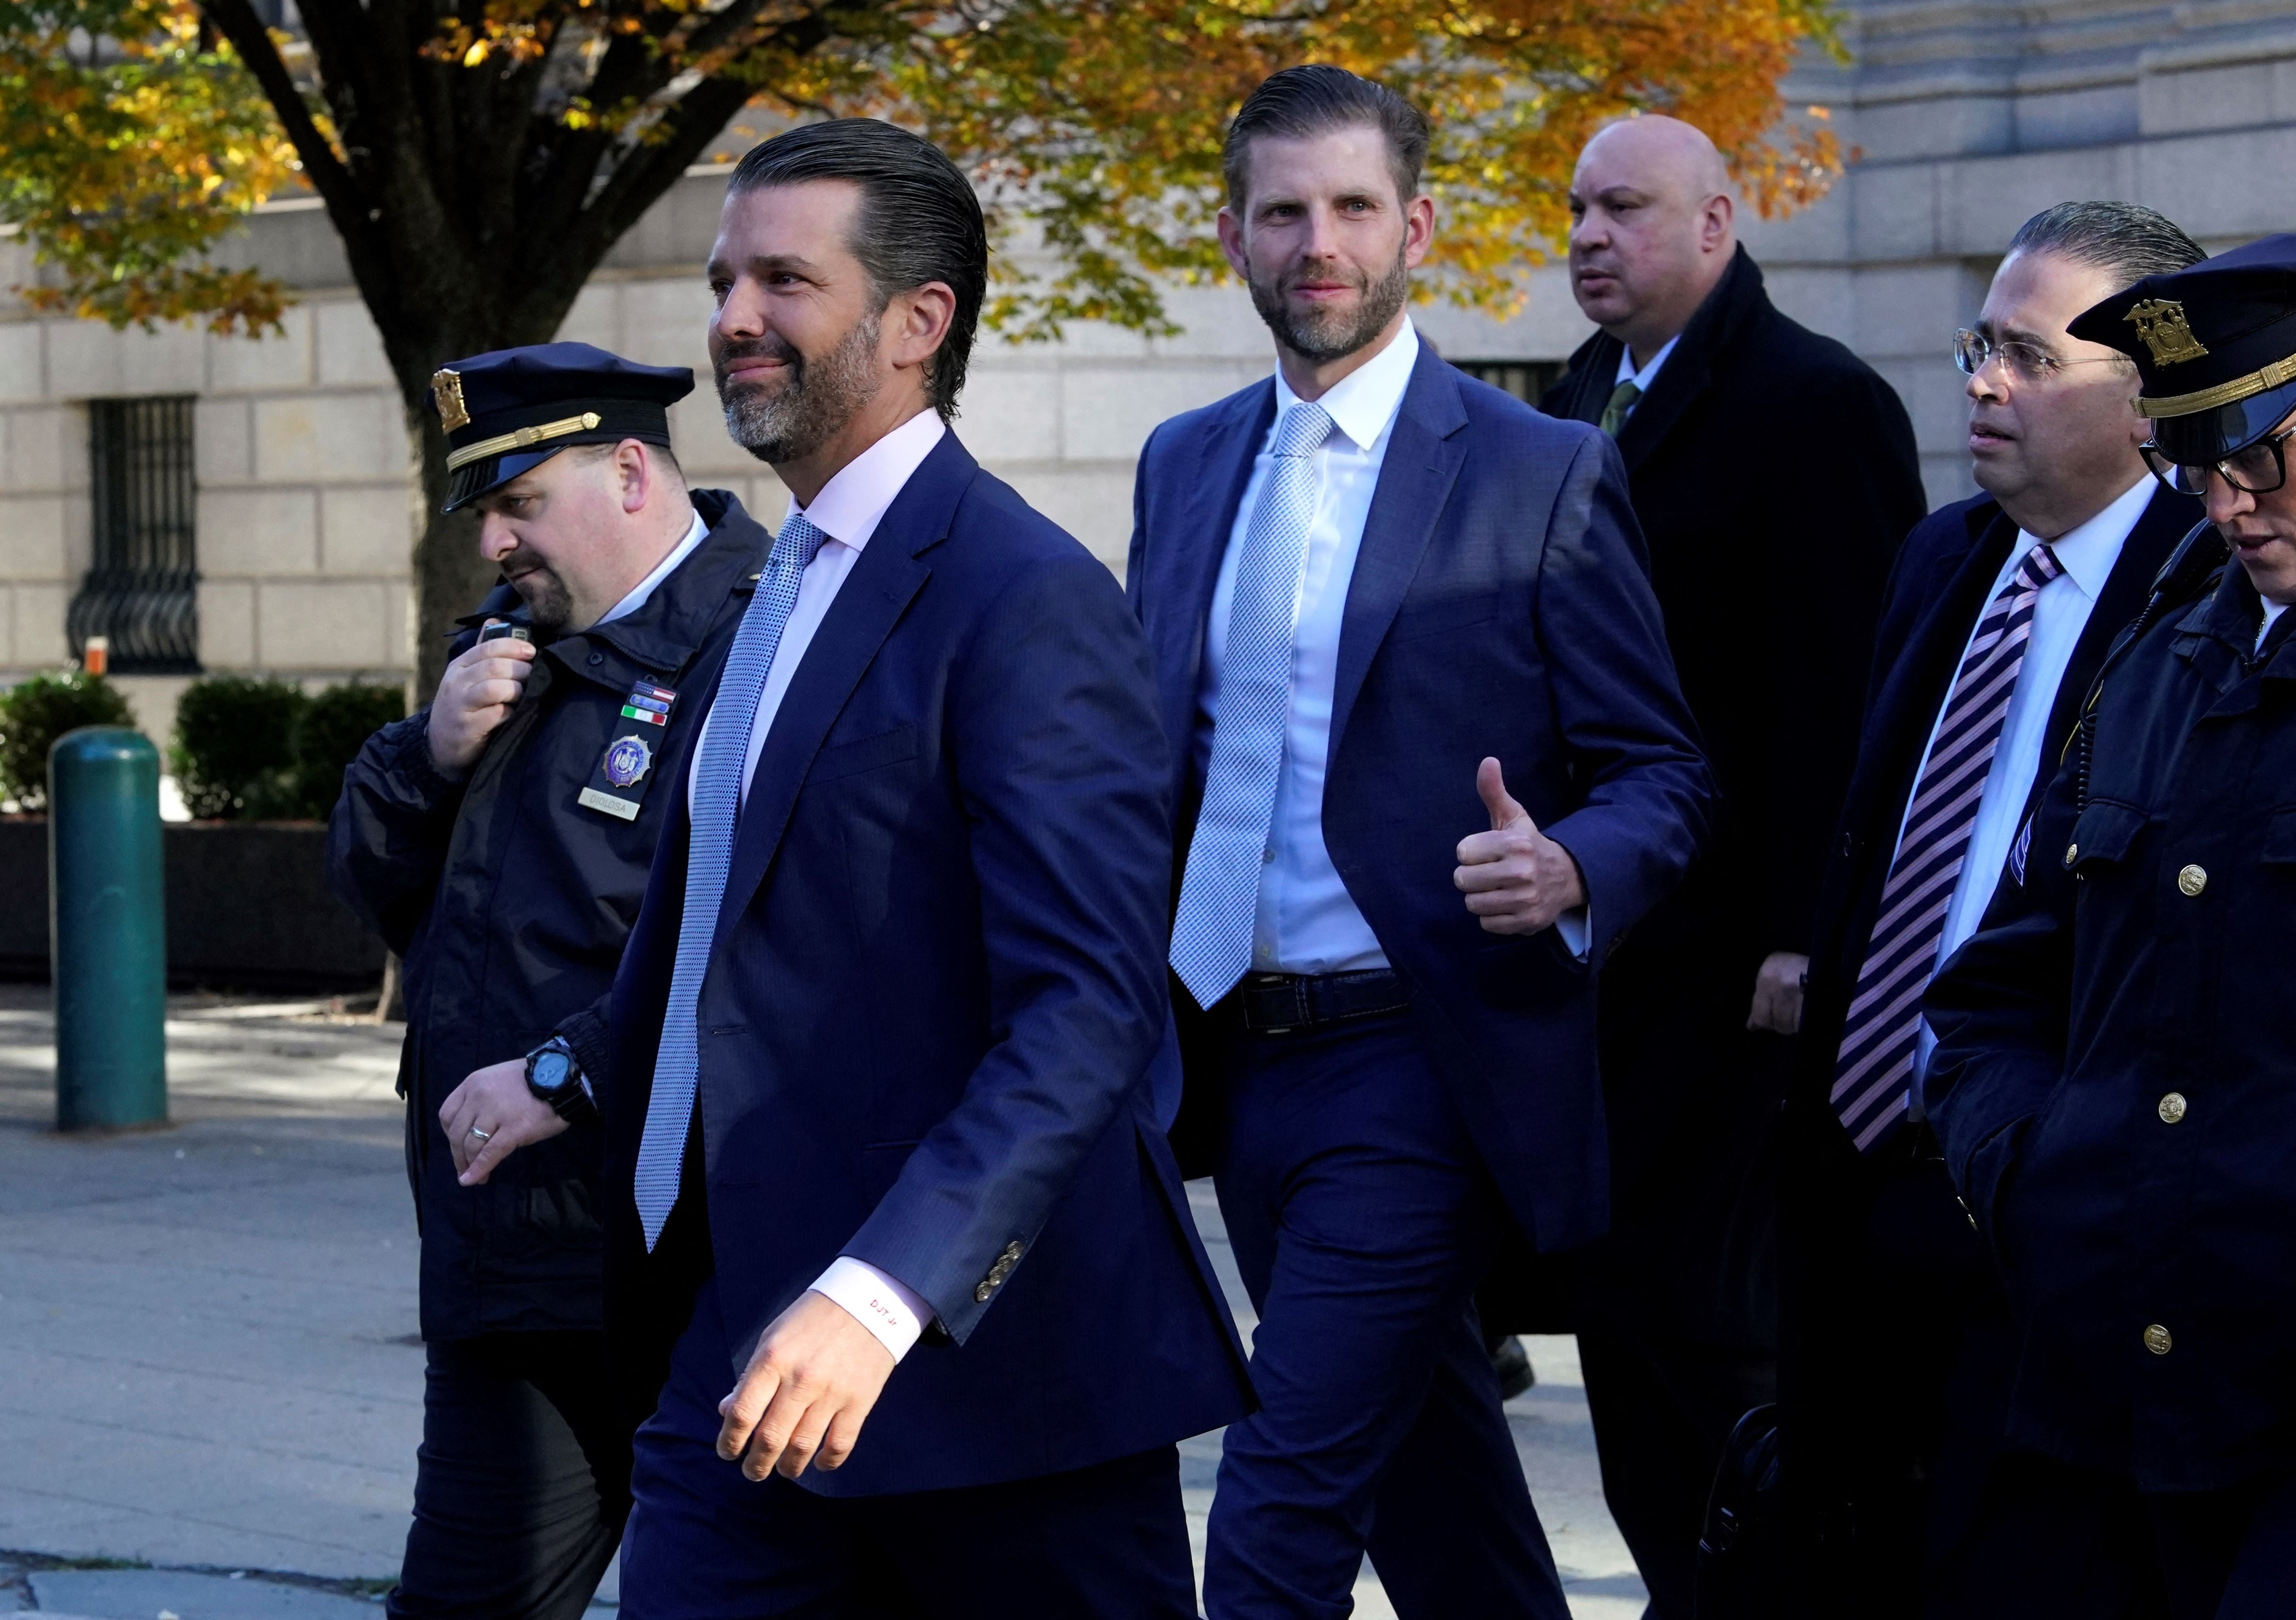 Donald Trump Jr and Eric Trump walk to the New York State Supreme Court building in Manhattan on 2 November for testimony in a civil fraud trial targeting the family’s business